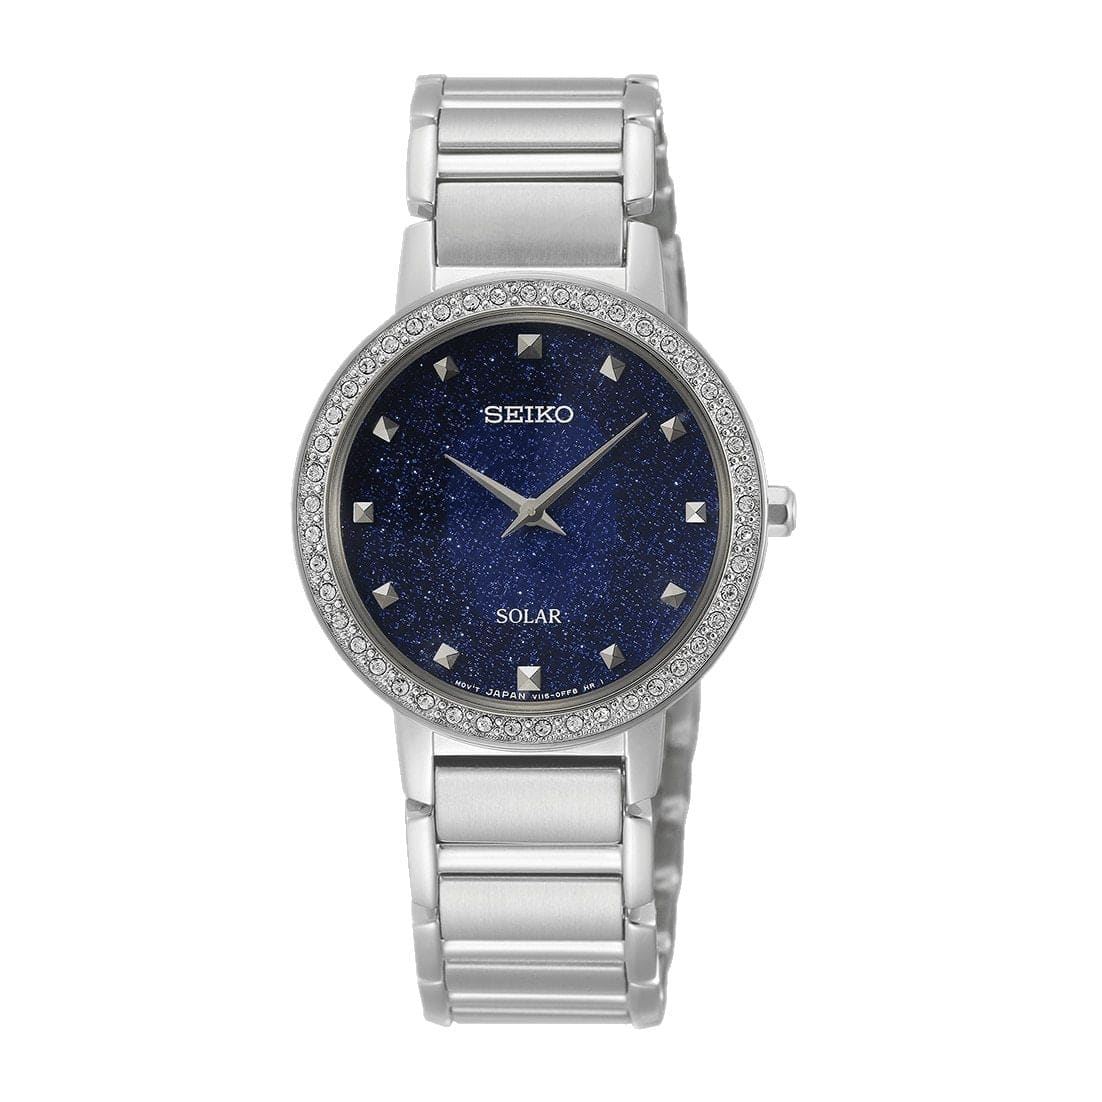 Seiko SUP433 Conceptual Silver Stainless Steel Glitter Blue Dial Women's Crystal Watch 029665197580